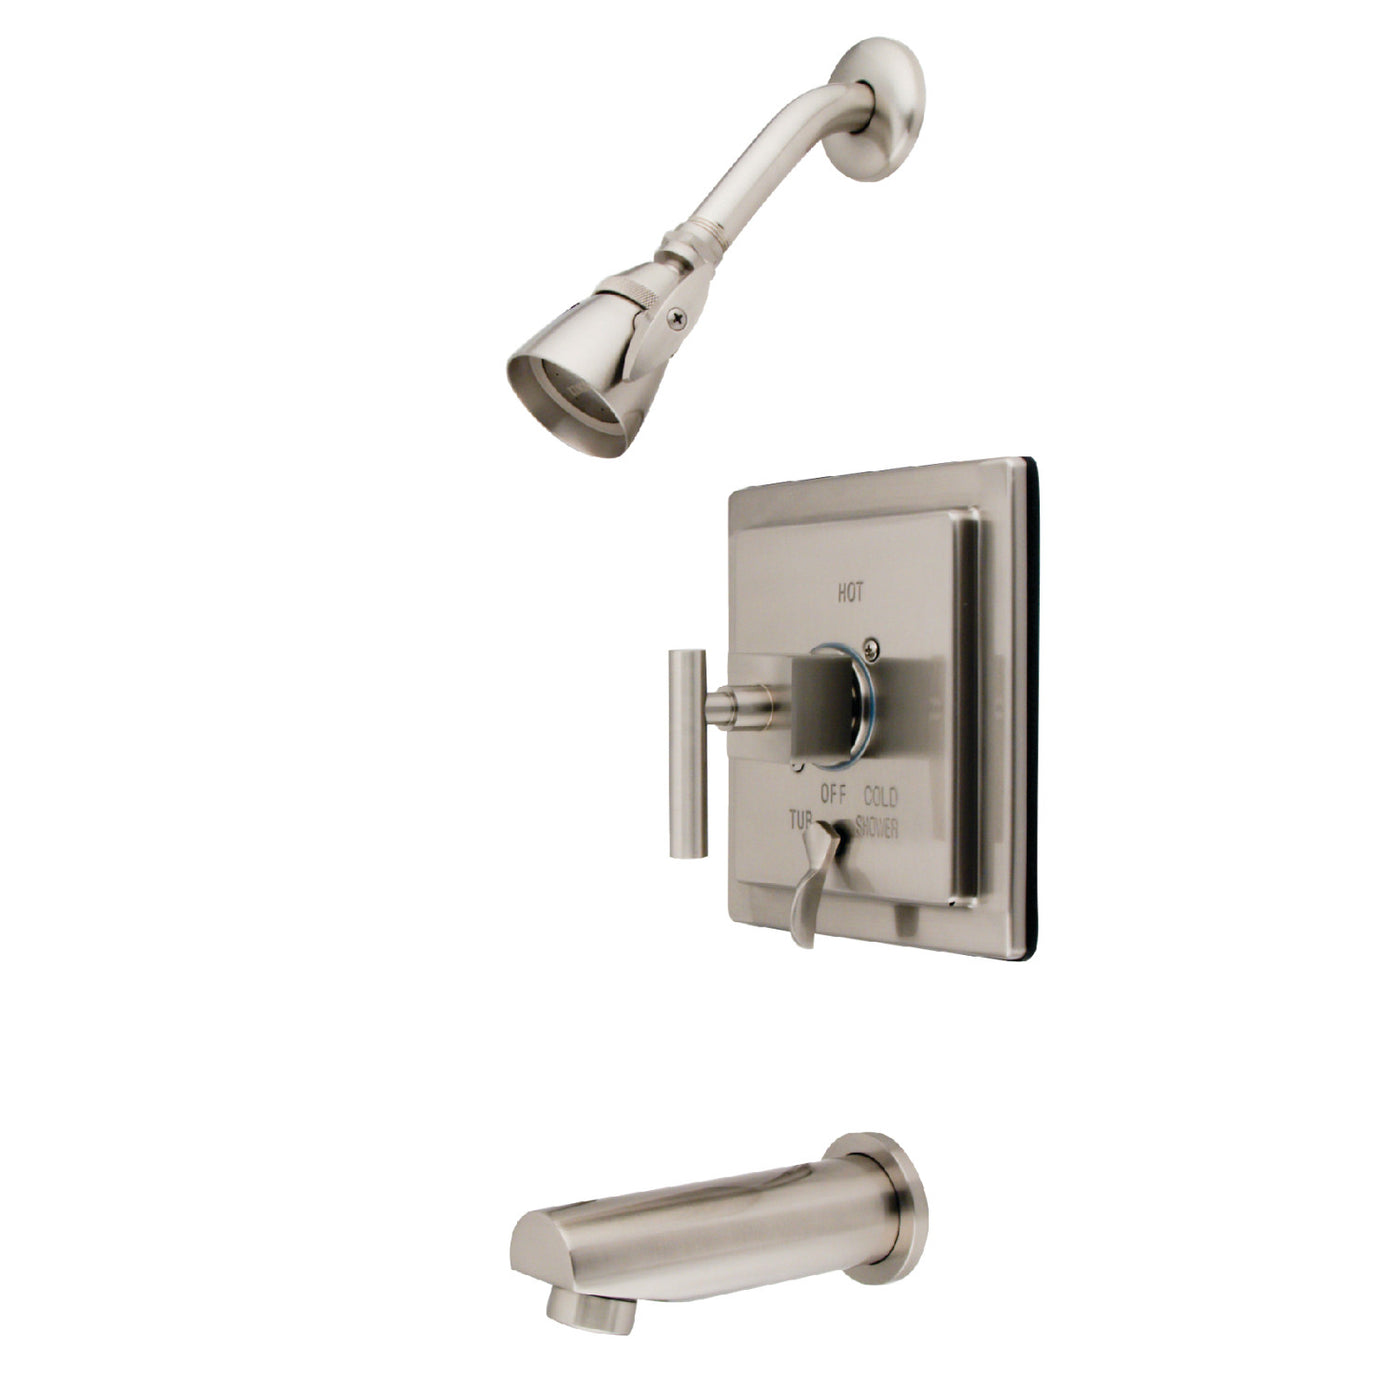 Elements of Design EB86580CQL Tub and Shower Faucet, Brushed Nickel